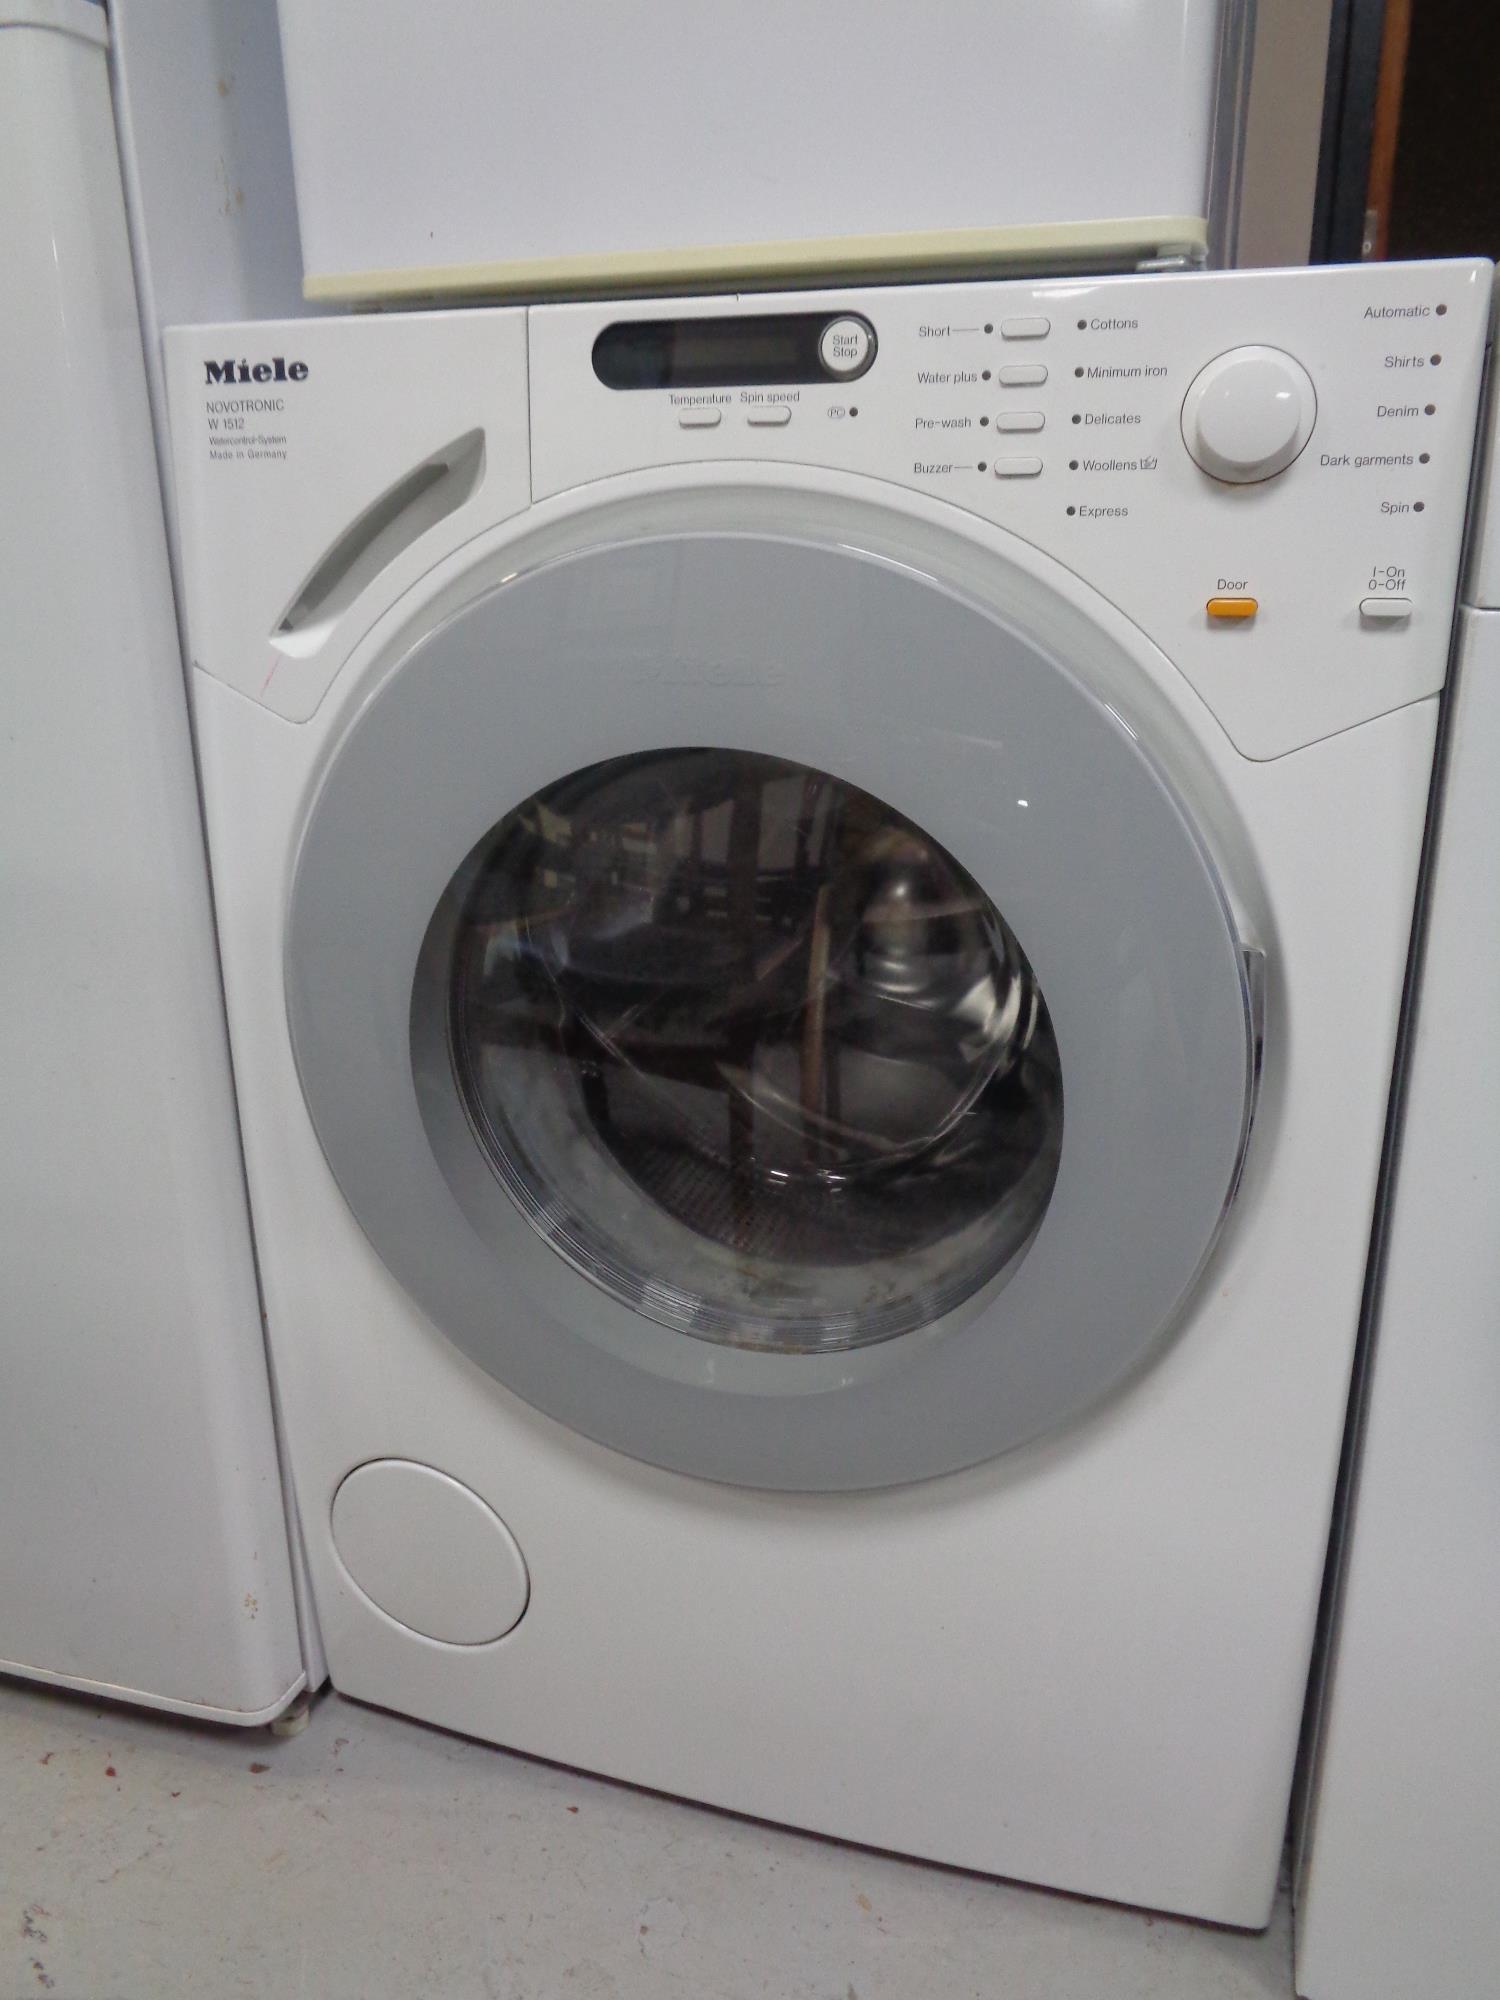 A Miele Novotronic Model W1512 Water Control System Automatic Washing Machine.